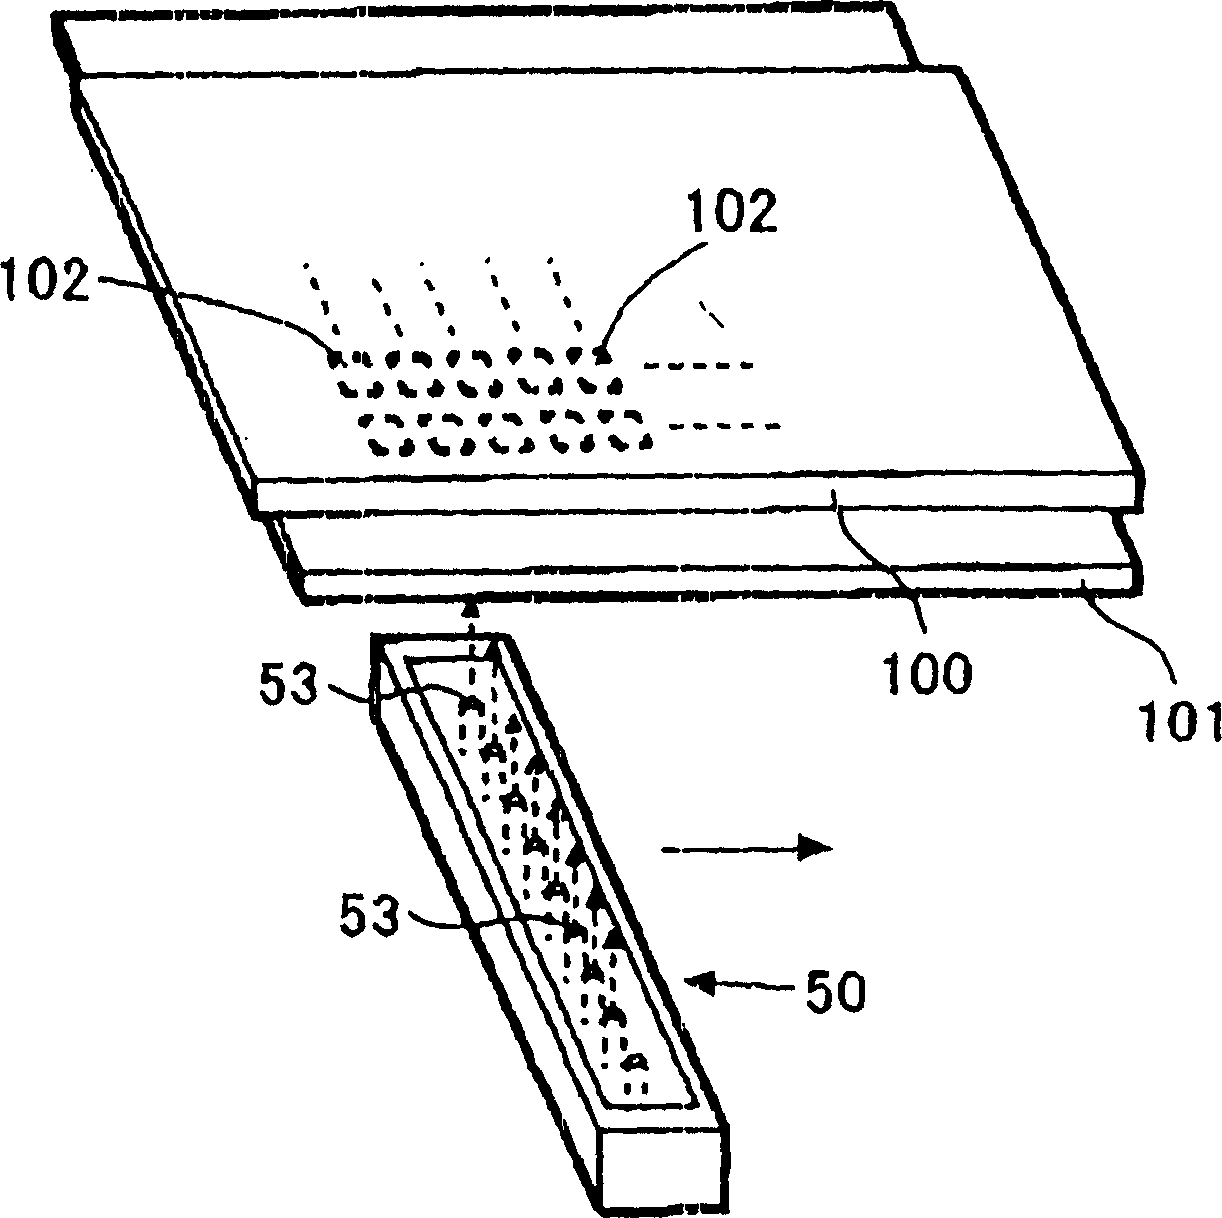 Method for manufacturing organic electroluminescent display device